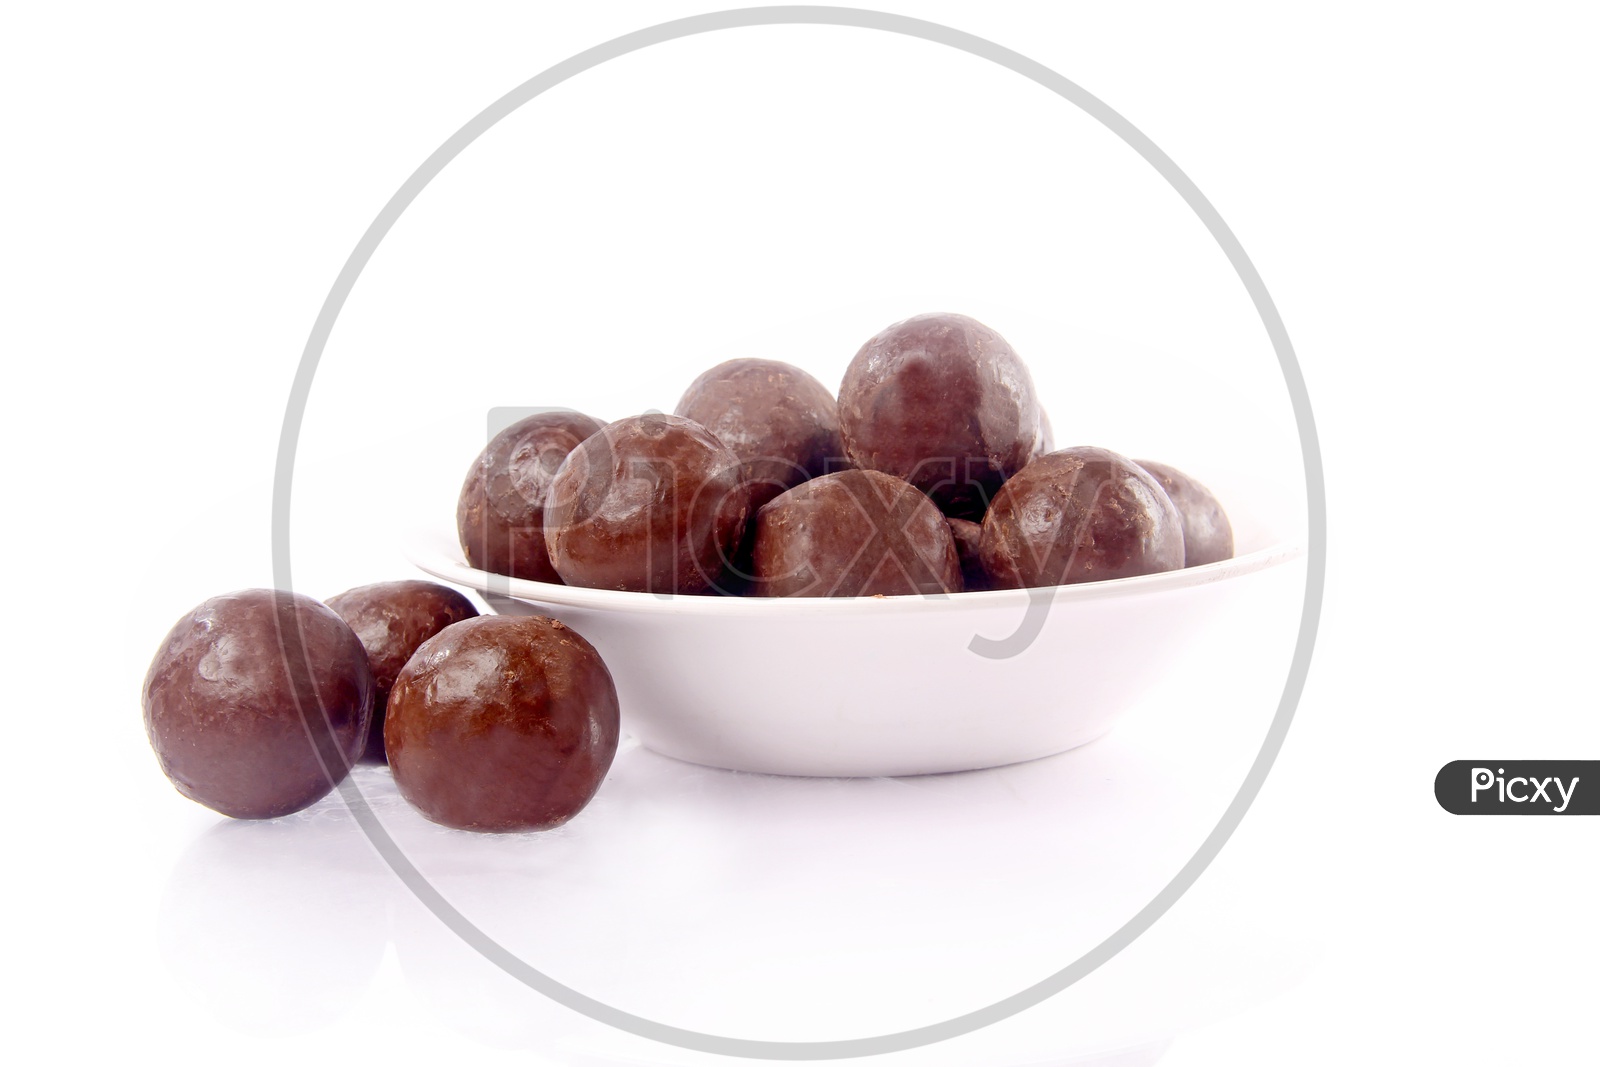 Chocolate Coated Hazel Nuts in a Bowl On an Isolated White Background